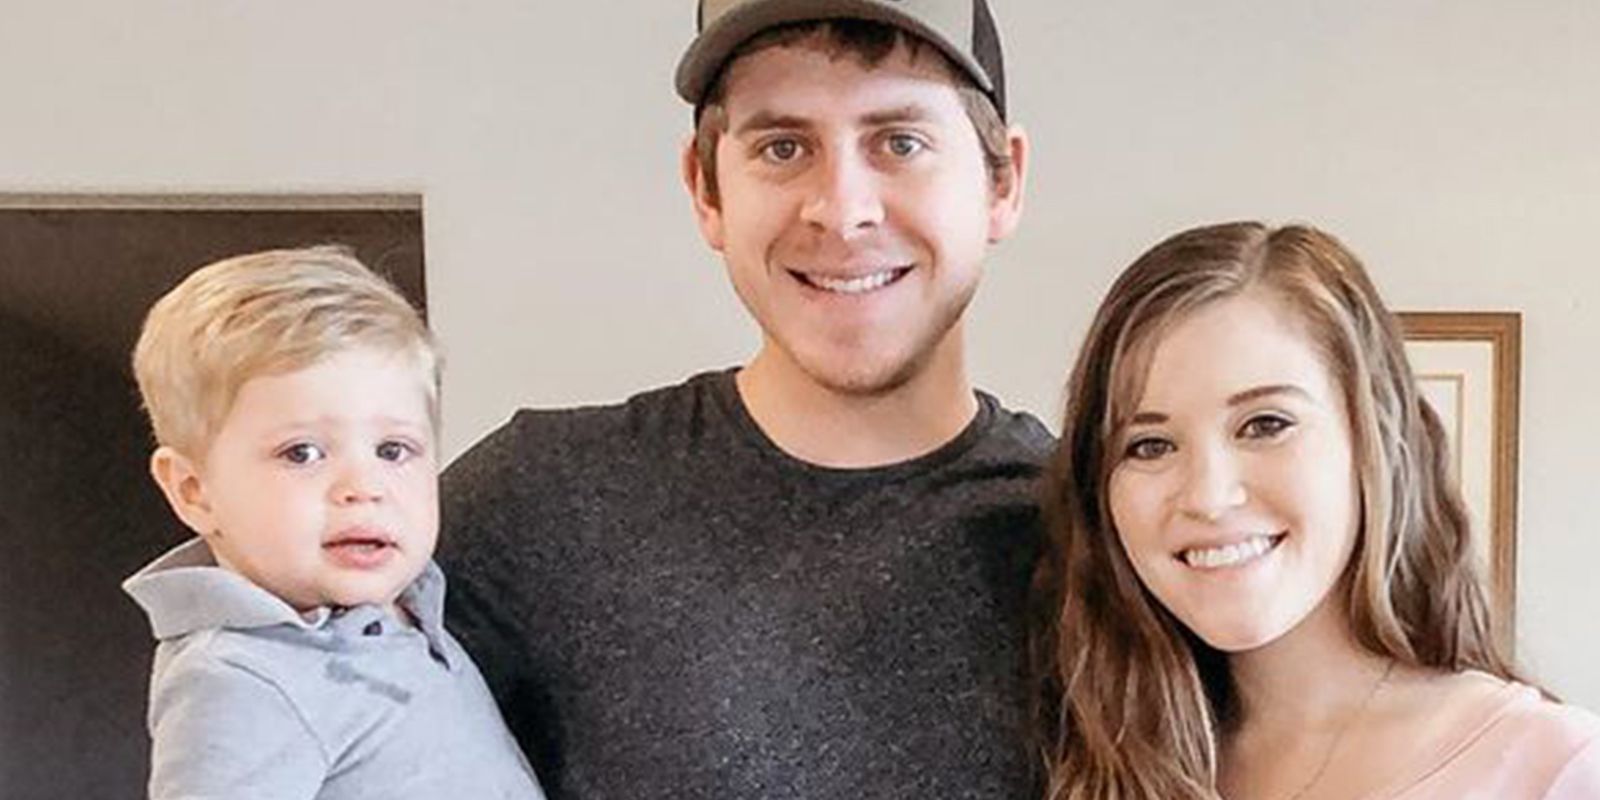 Joyanna Duggar smiling with her husband and child 